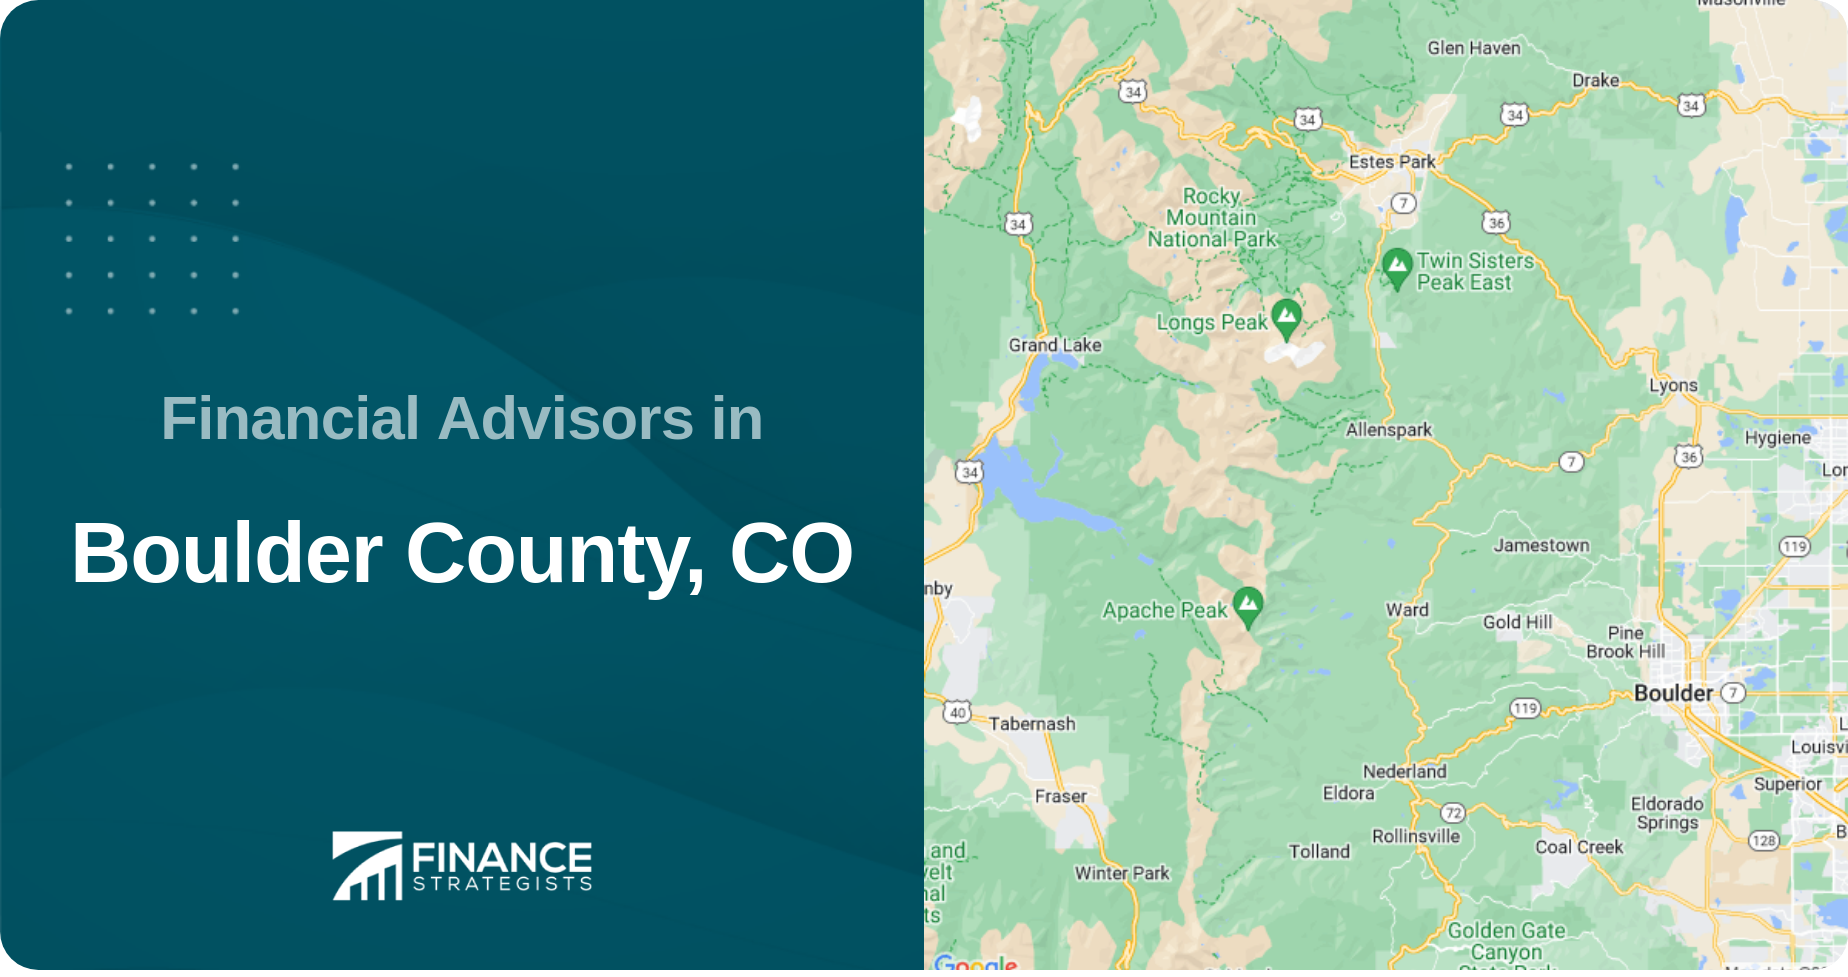 Financial Advisors in Boulder County, CO